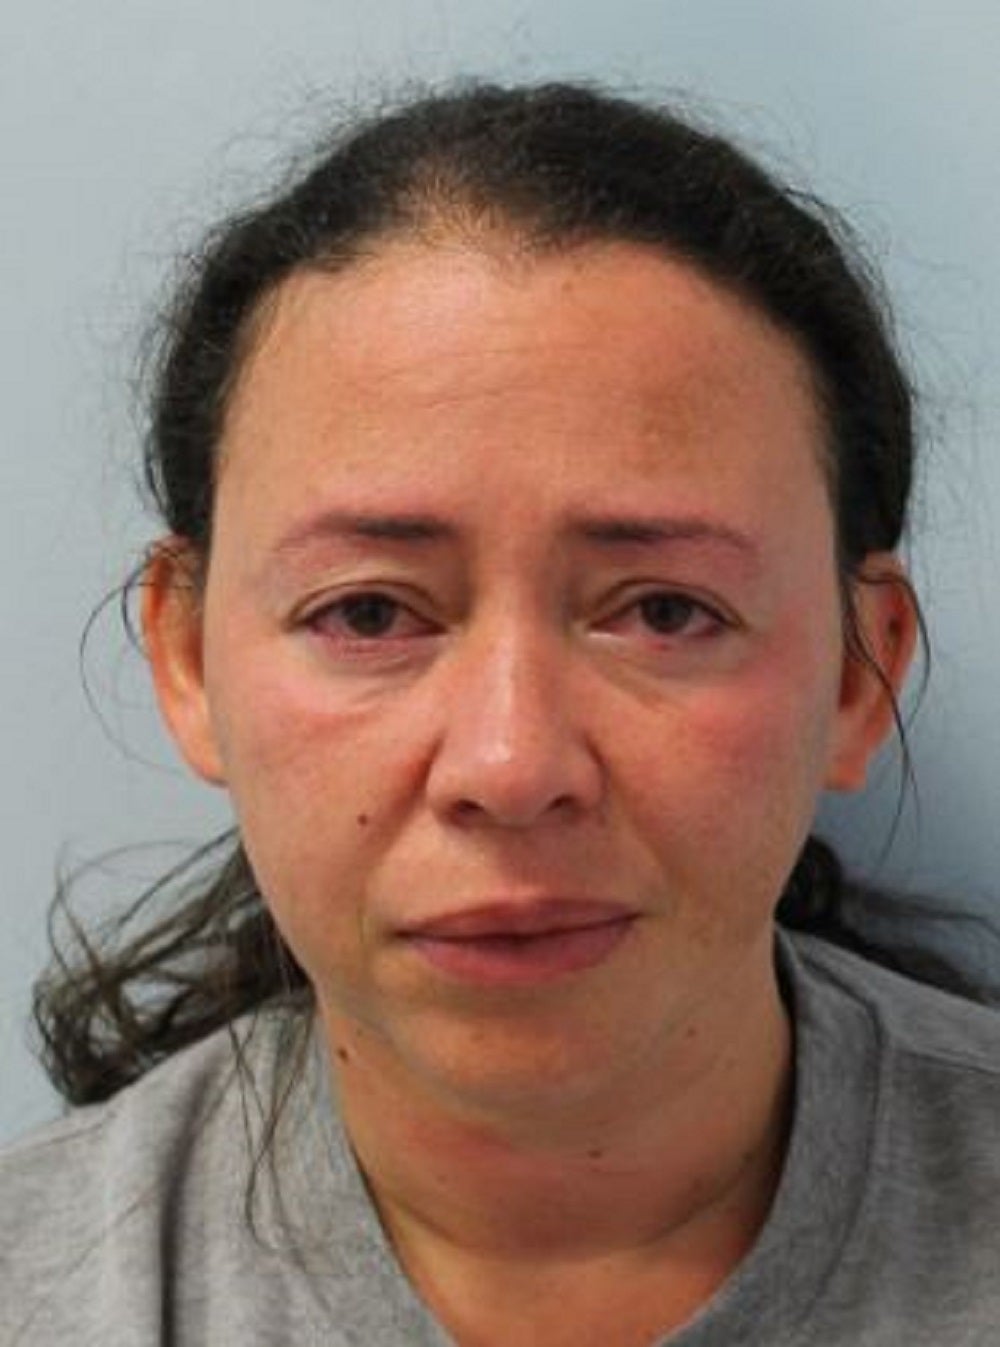 Gardene De Carvalho, 43, has been jailed for causing the death of a 13-year-old girl by dangerous driving (Met Police/PA)